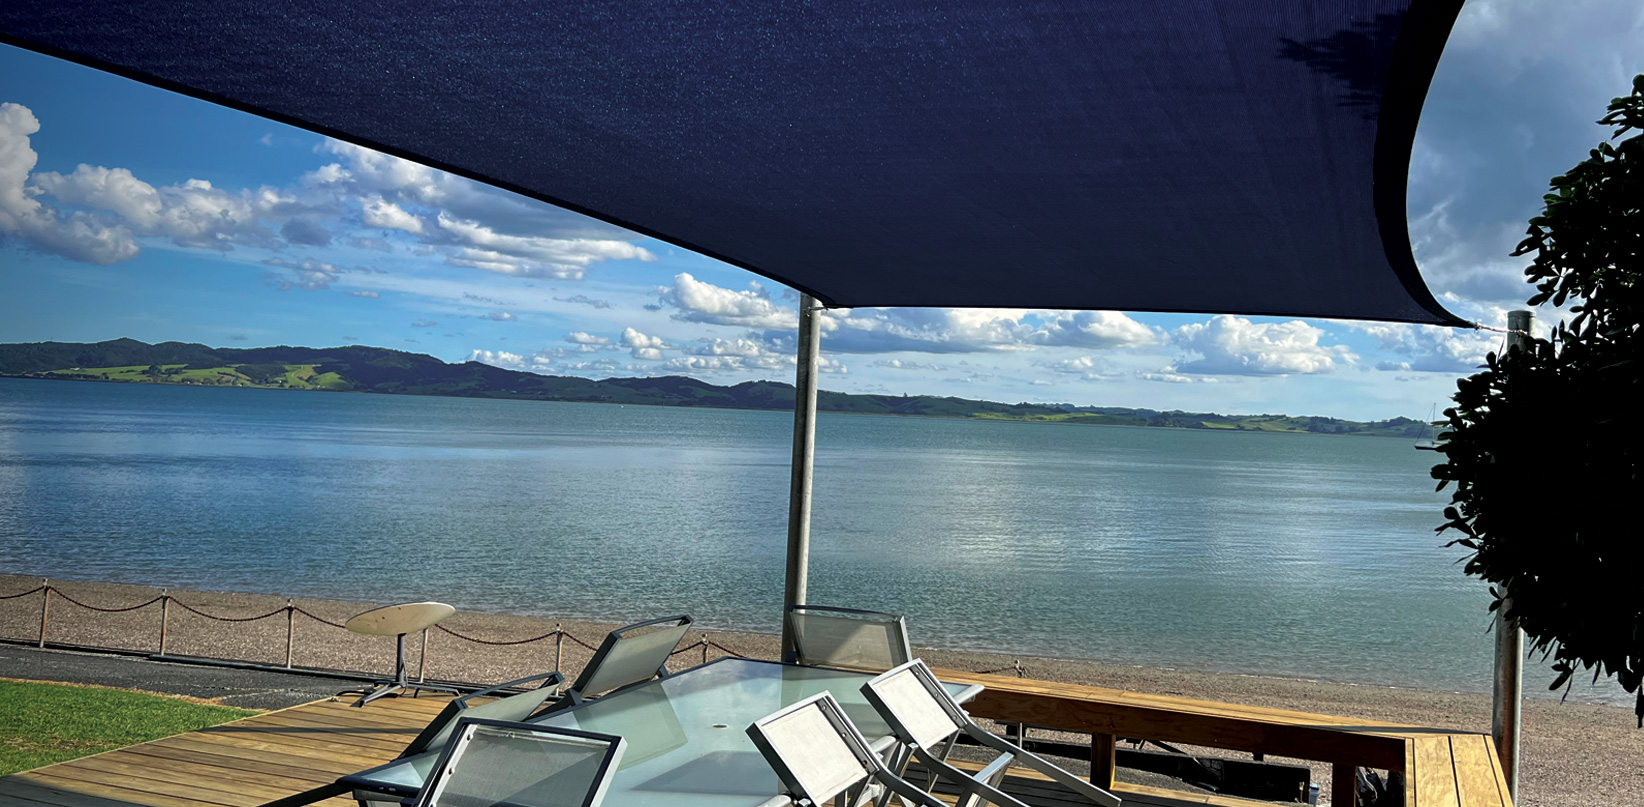 98% U.V protection shade sails provide stylish shade to increase the use of your outdoor areas, in Whangarei Northland.